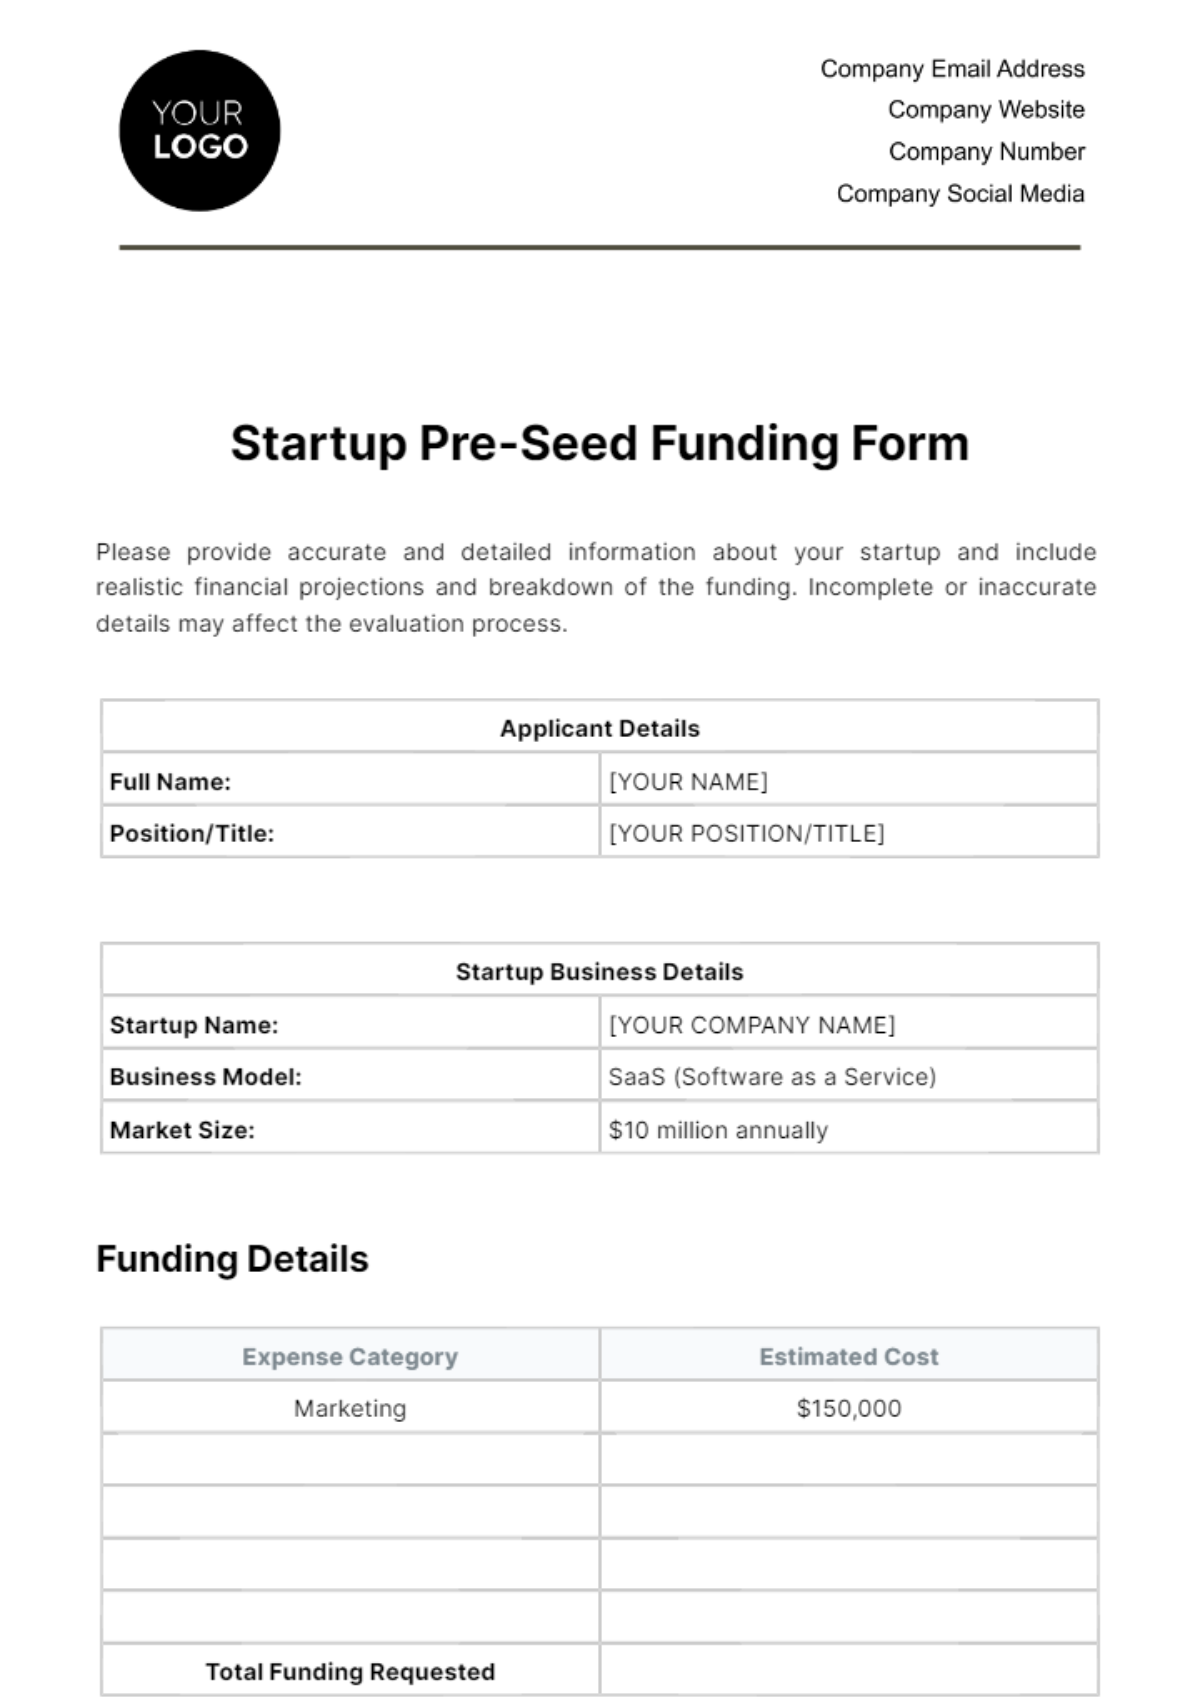 Free Startup Pre-Seed Funding Form Template